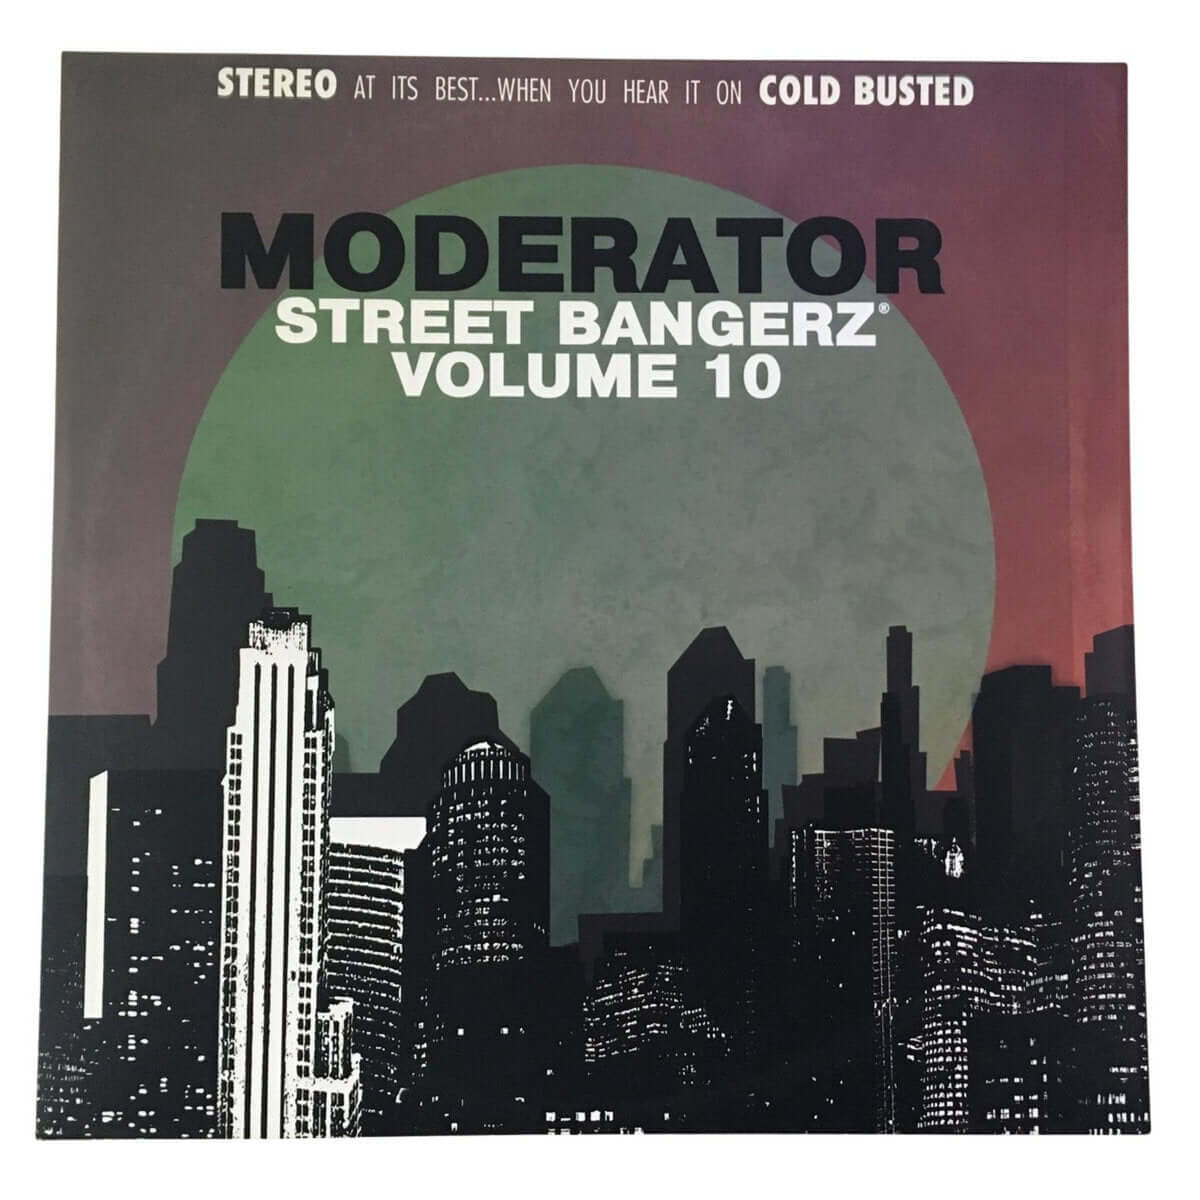 Moderator - Street Bangerz Volume 10 - Limited Edition 12 Inch Vinyl - Cold Busted